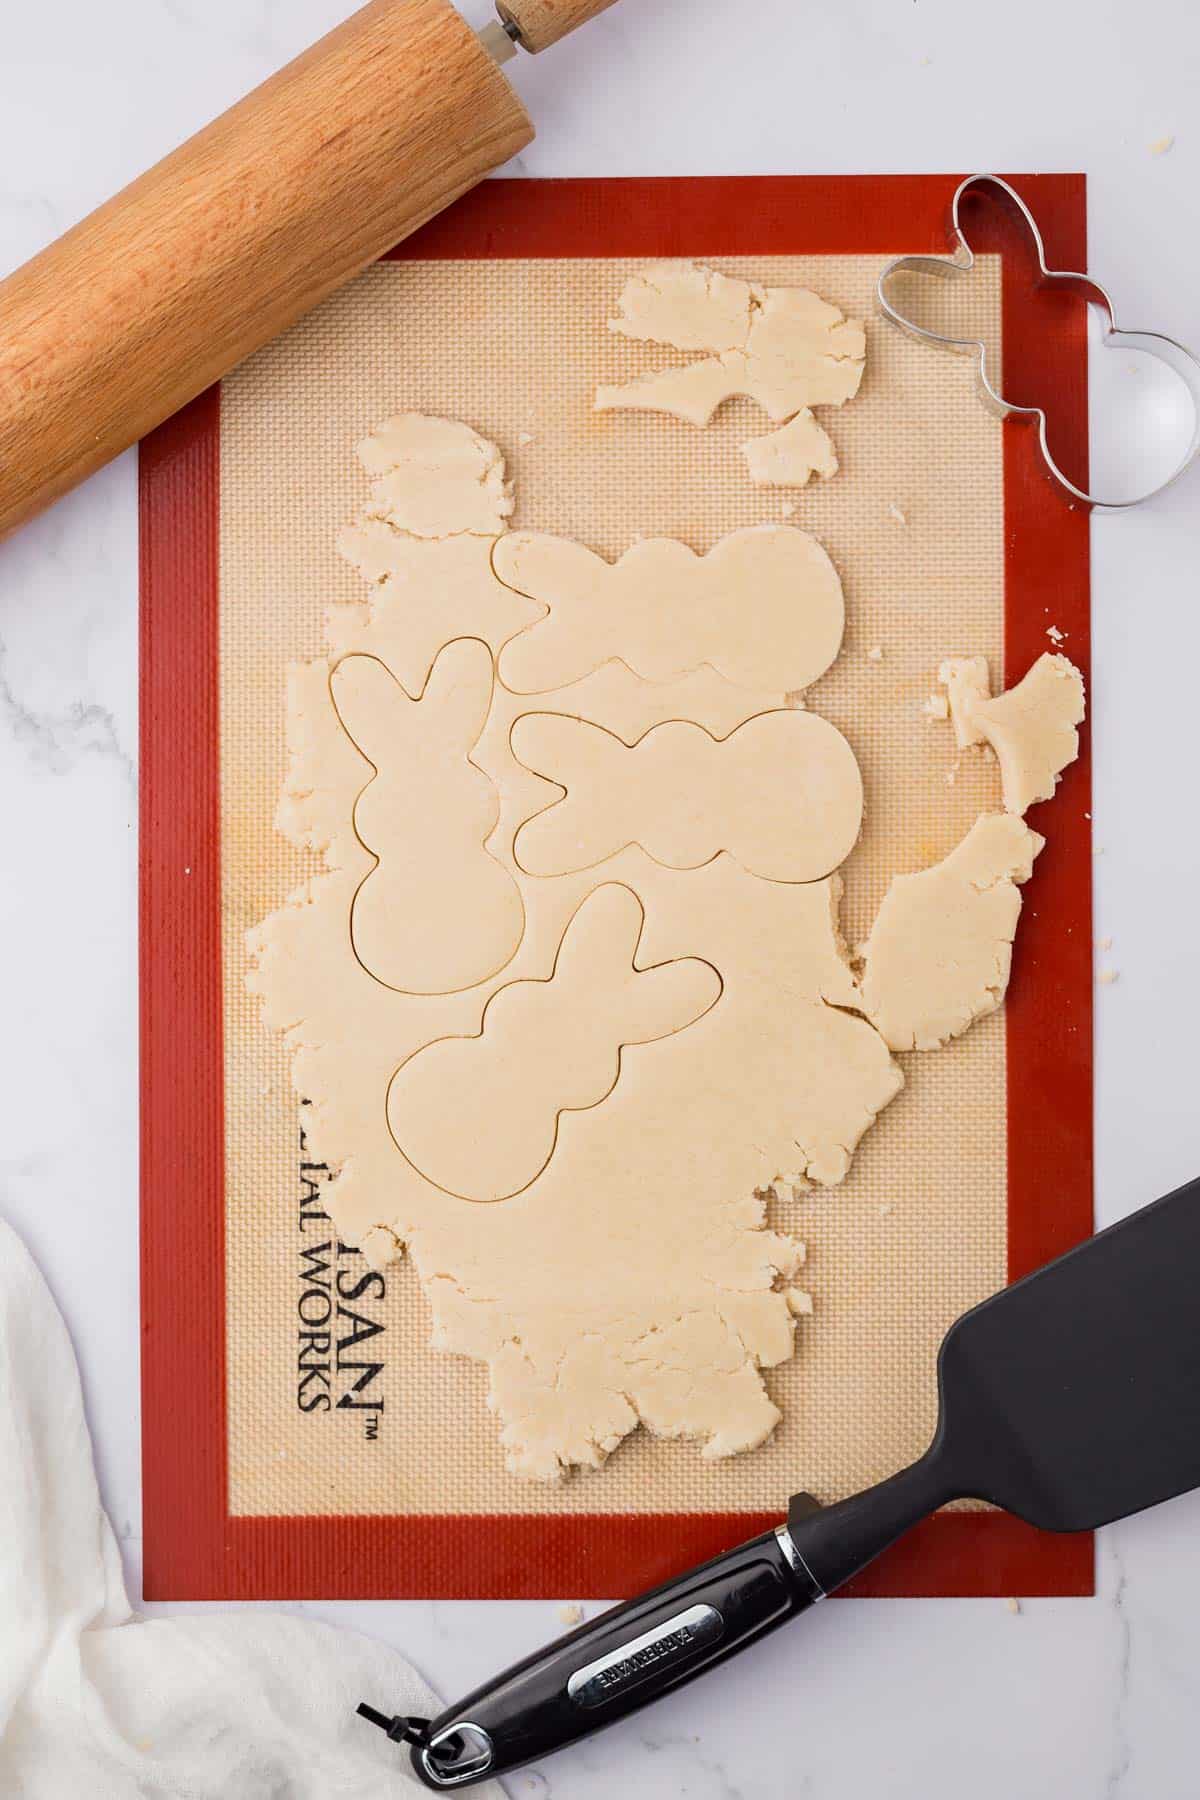 silicone mat with sugar cookie dough on top, with bunny cutout prints in it, surrounded by a rolling pin, spatula, and peeps bunny cookie cutter